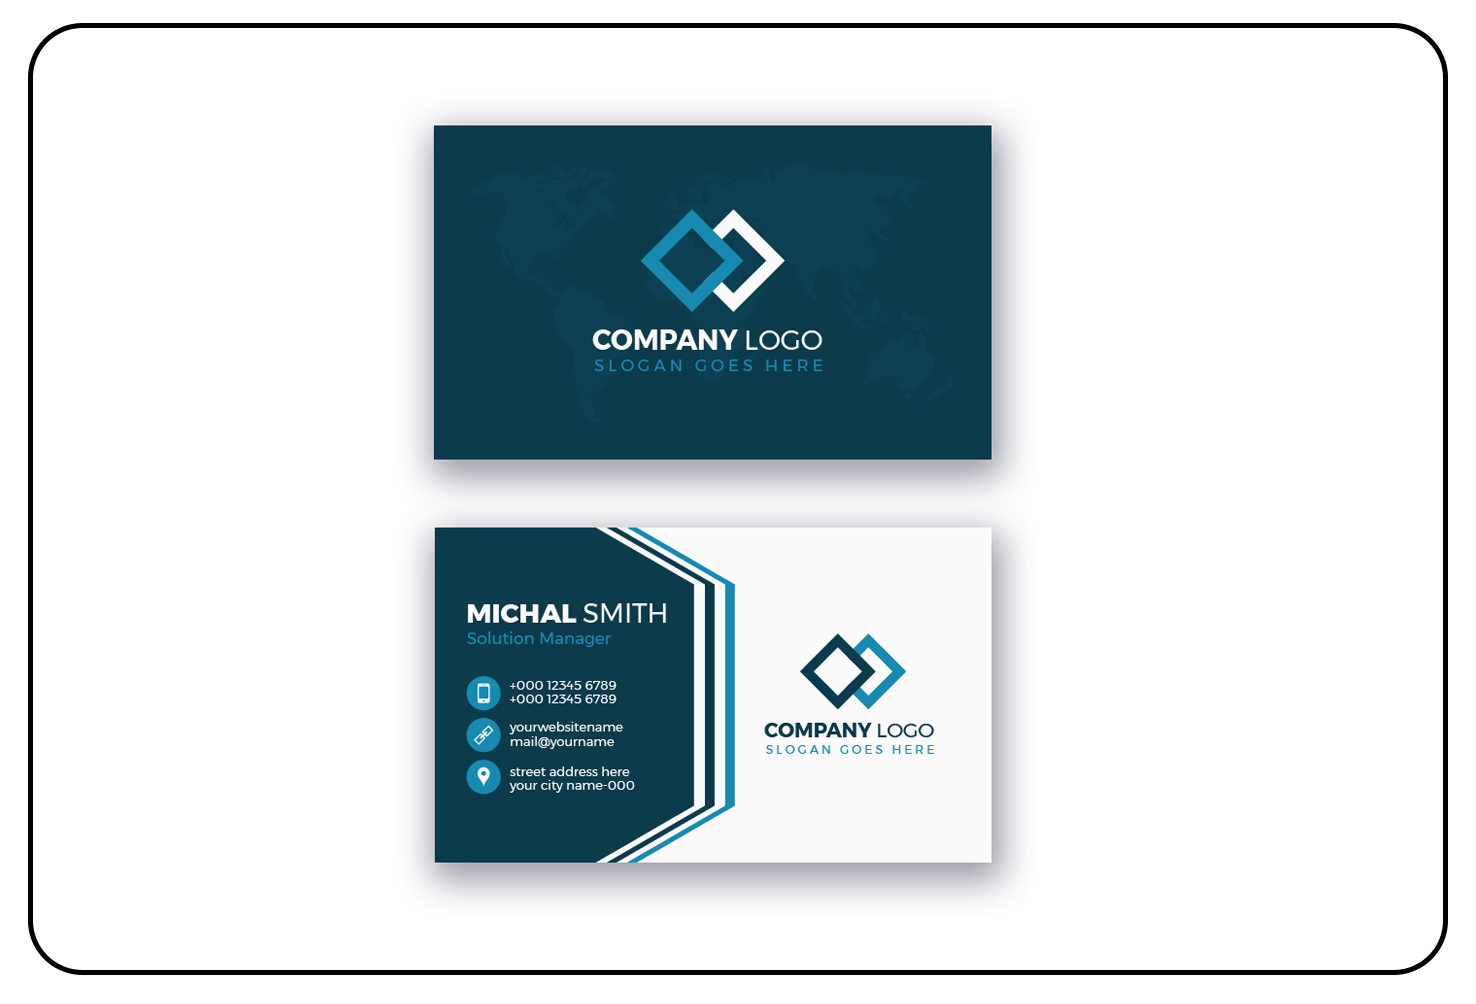 Professional business card design for impactful networking.